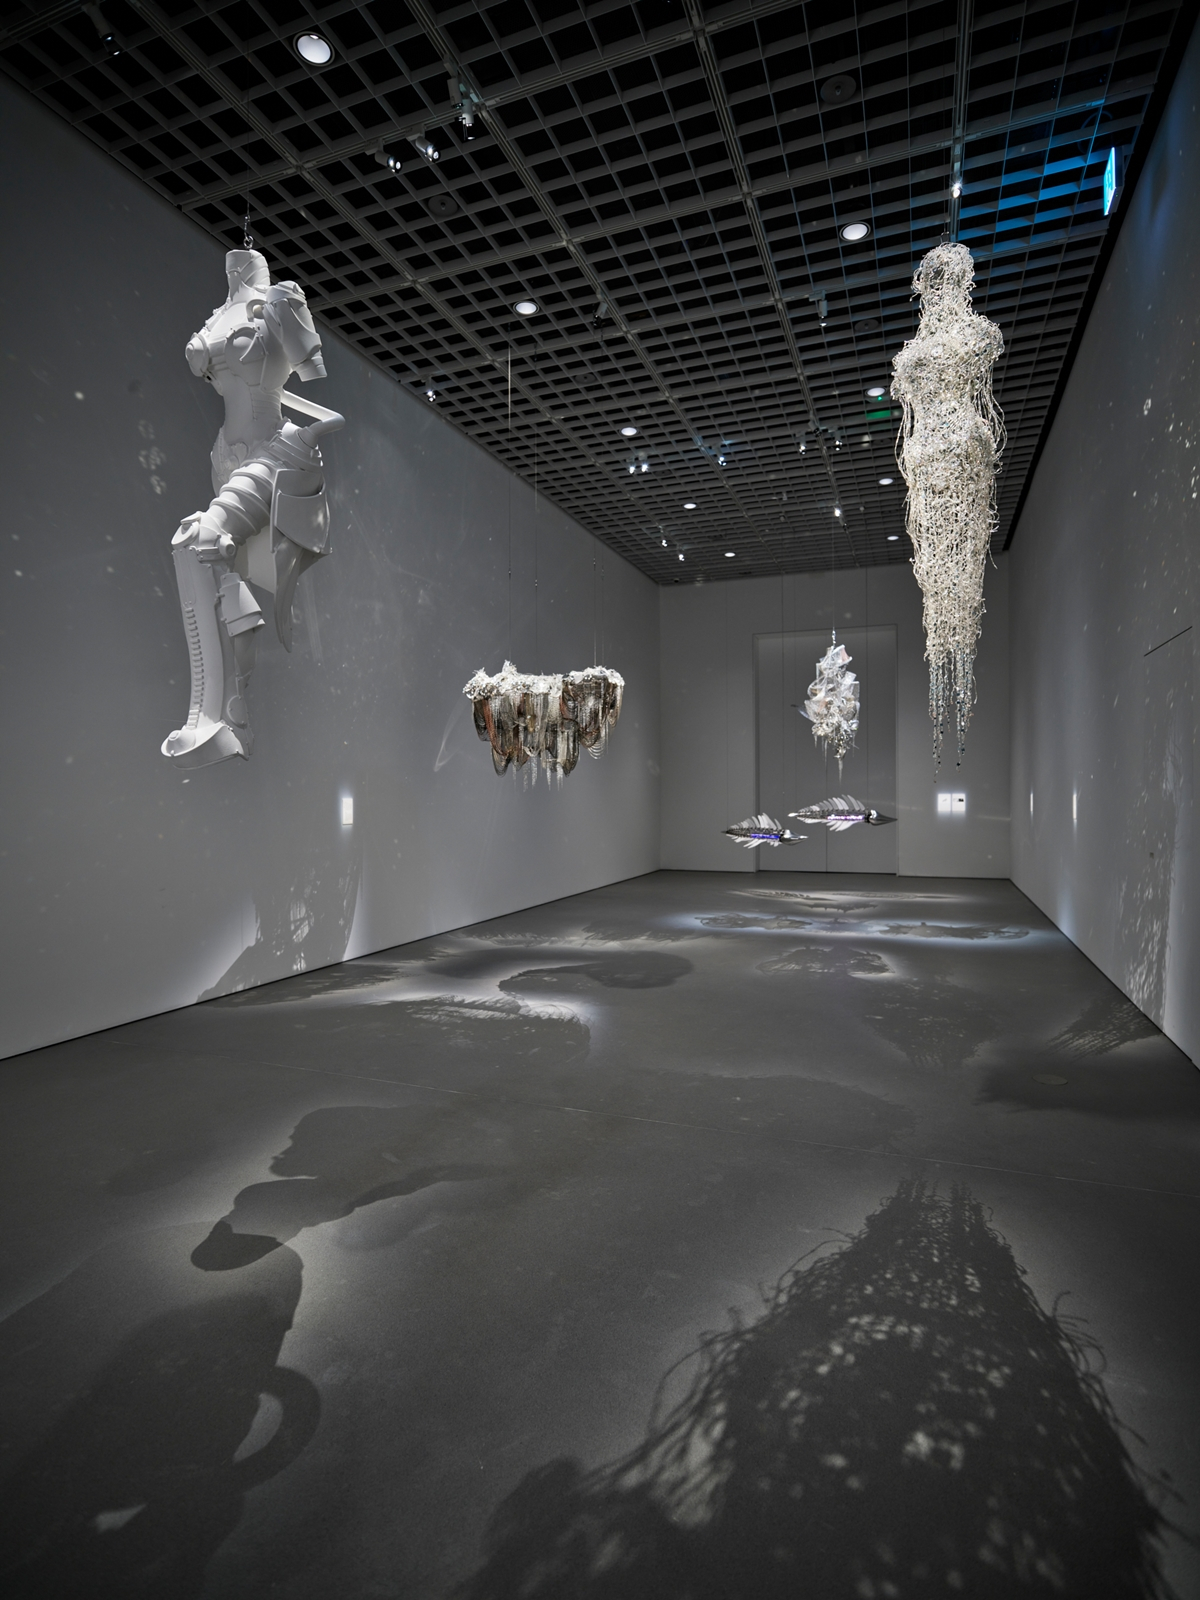 Installation view of sculptural works by Lee Bul and Choe U-ram (APMA)